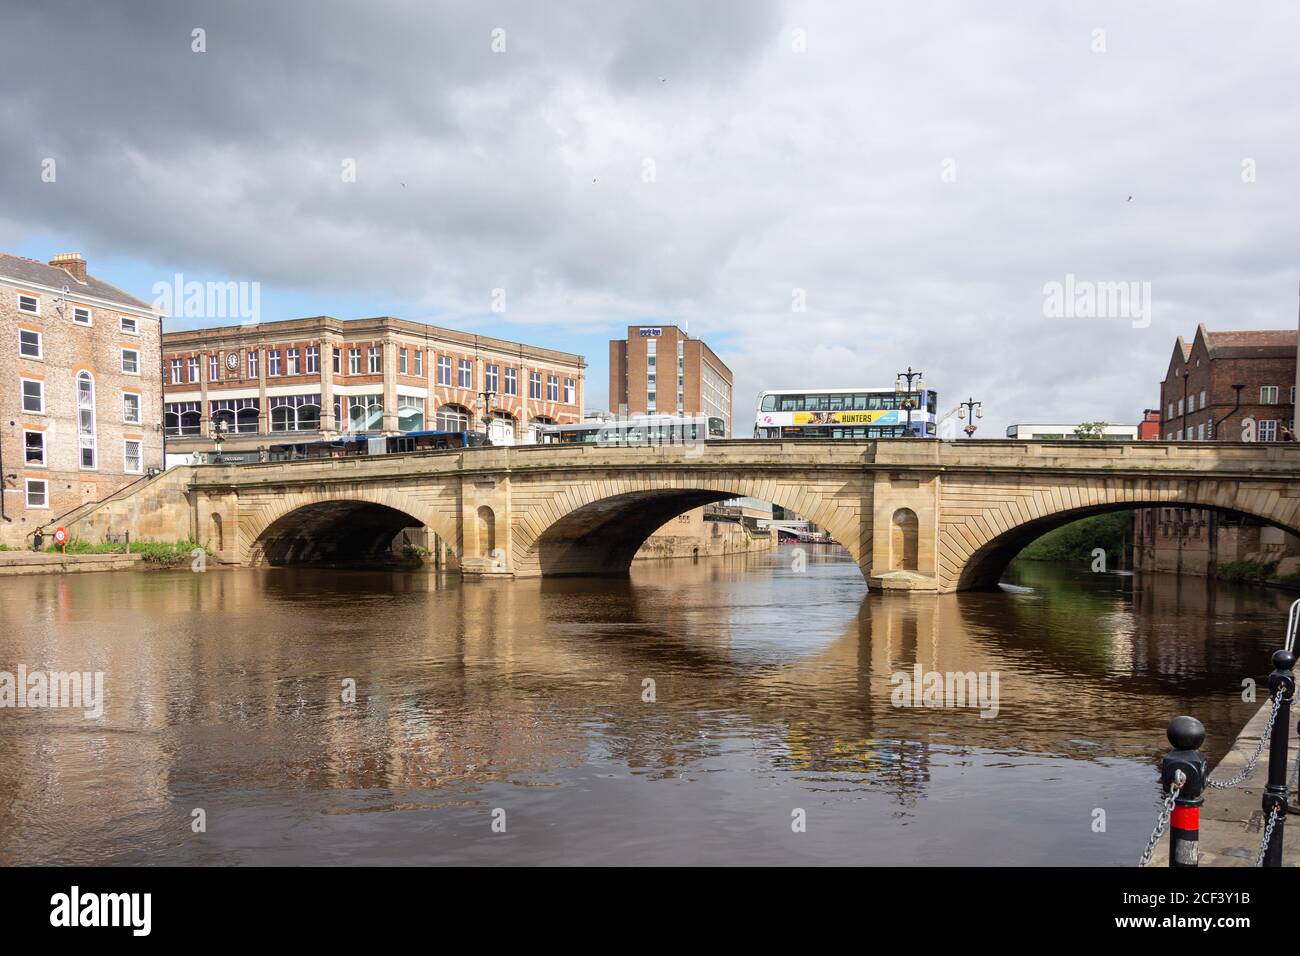 Ouse Bridge over River Ouse, York, North Yorkshire, England, United Kingdom Stock Photo